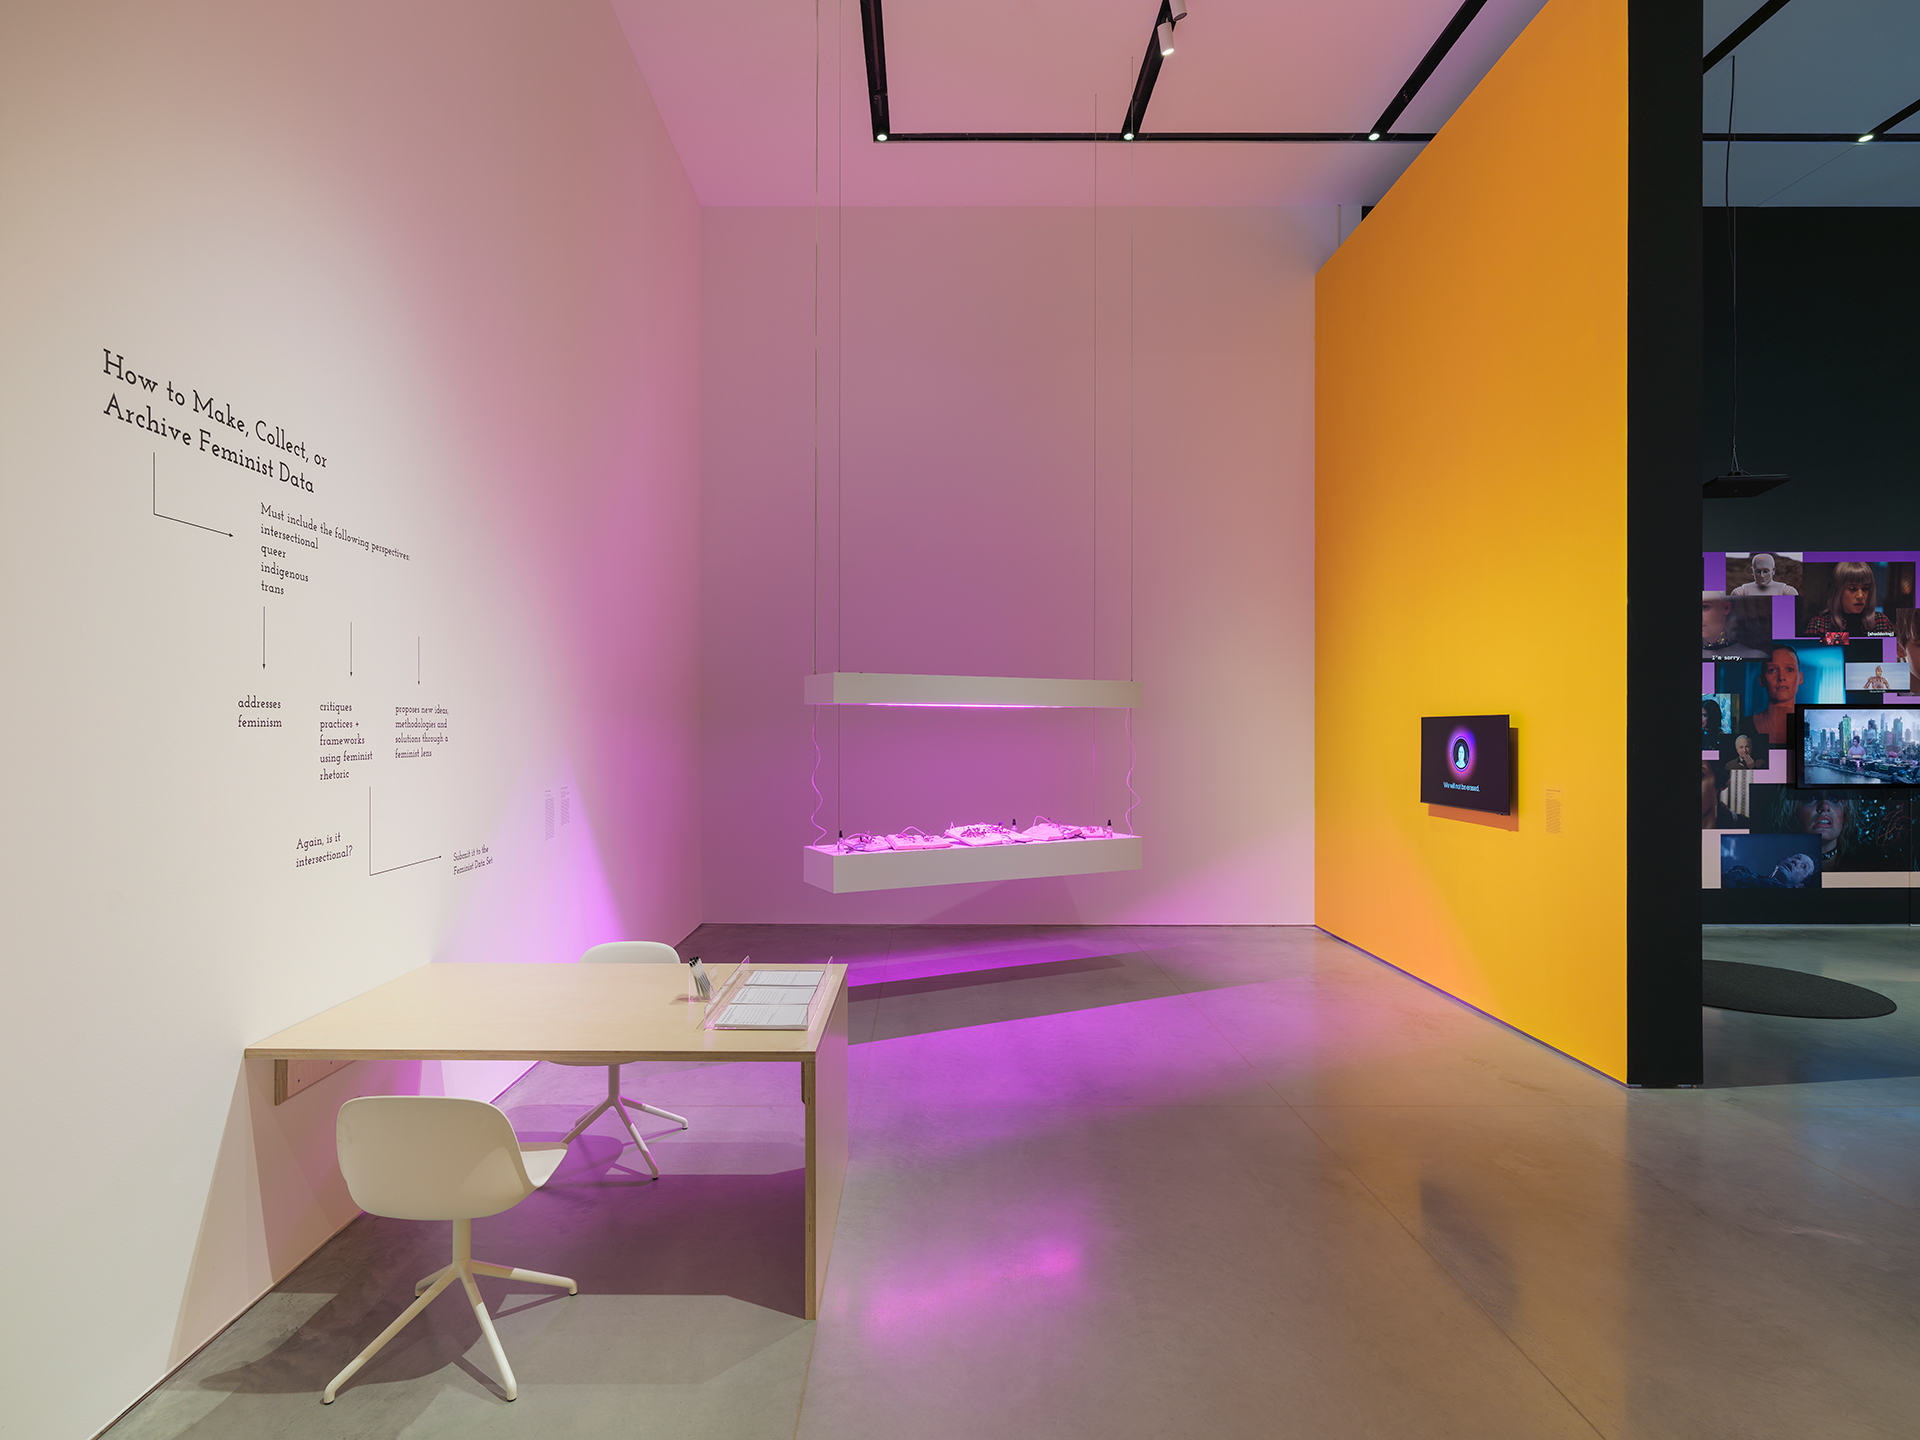 Interior space with three walls. The left and back wall are white, the right wall is yellow with black trim. There is a wooden desk with white chairs pushed against the left wall and two hanging platforms hovering near the back wall are glowing purple.